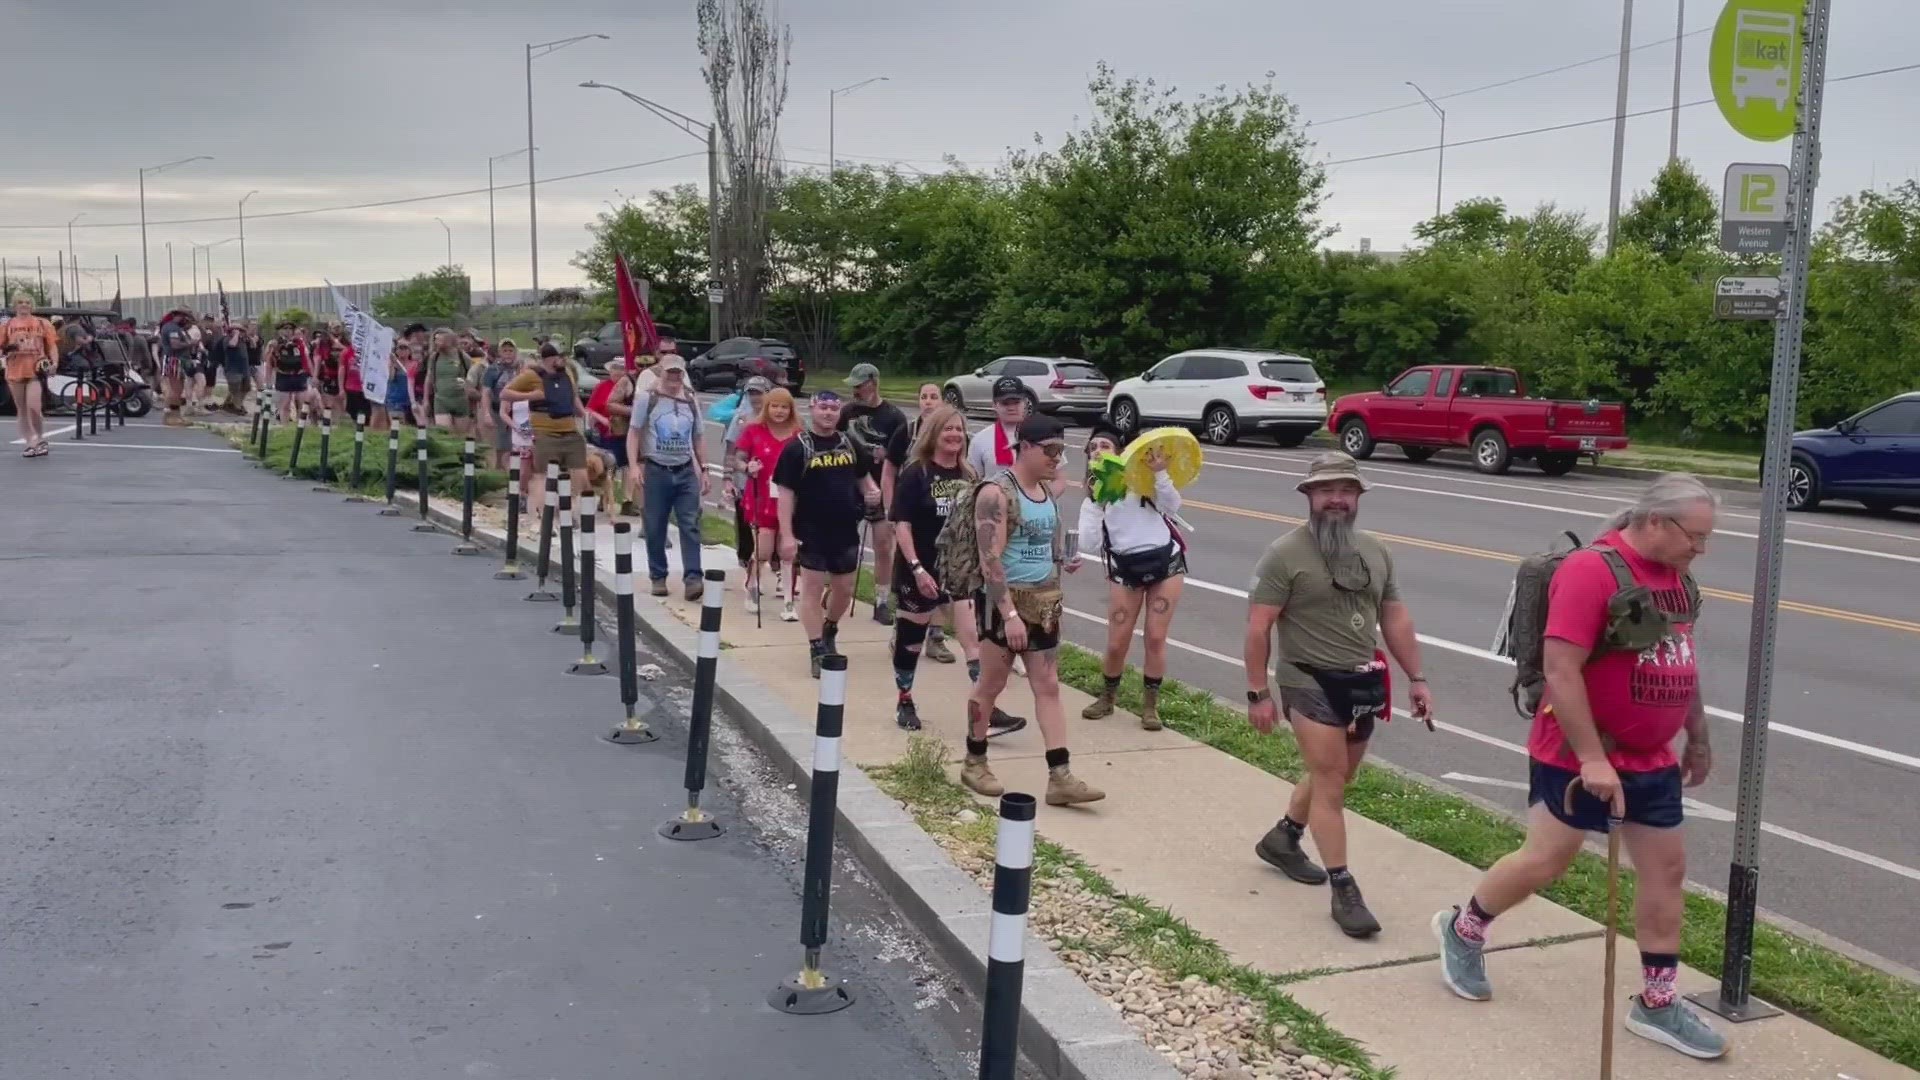 Nonprofit takes a hike to spread awareness for veterans who die by suicide. The organization says the way out is by leaning onto the community.